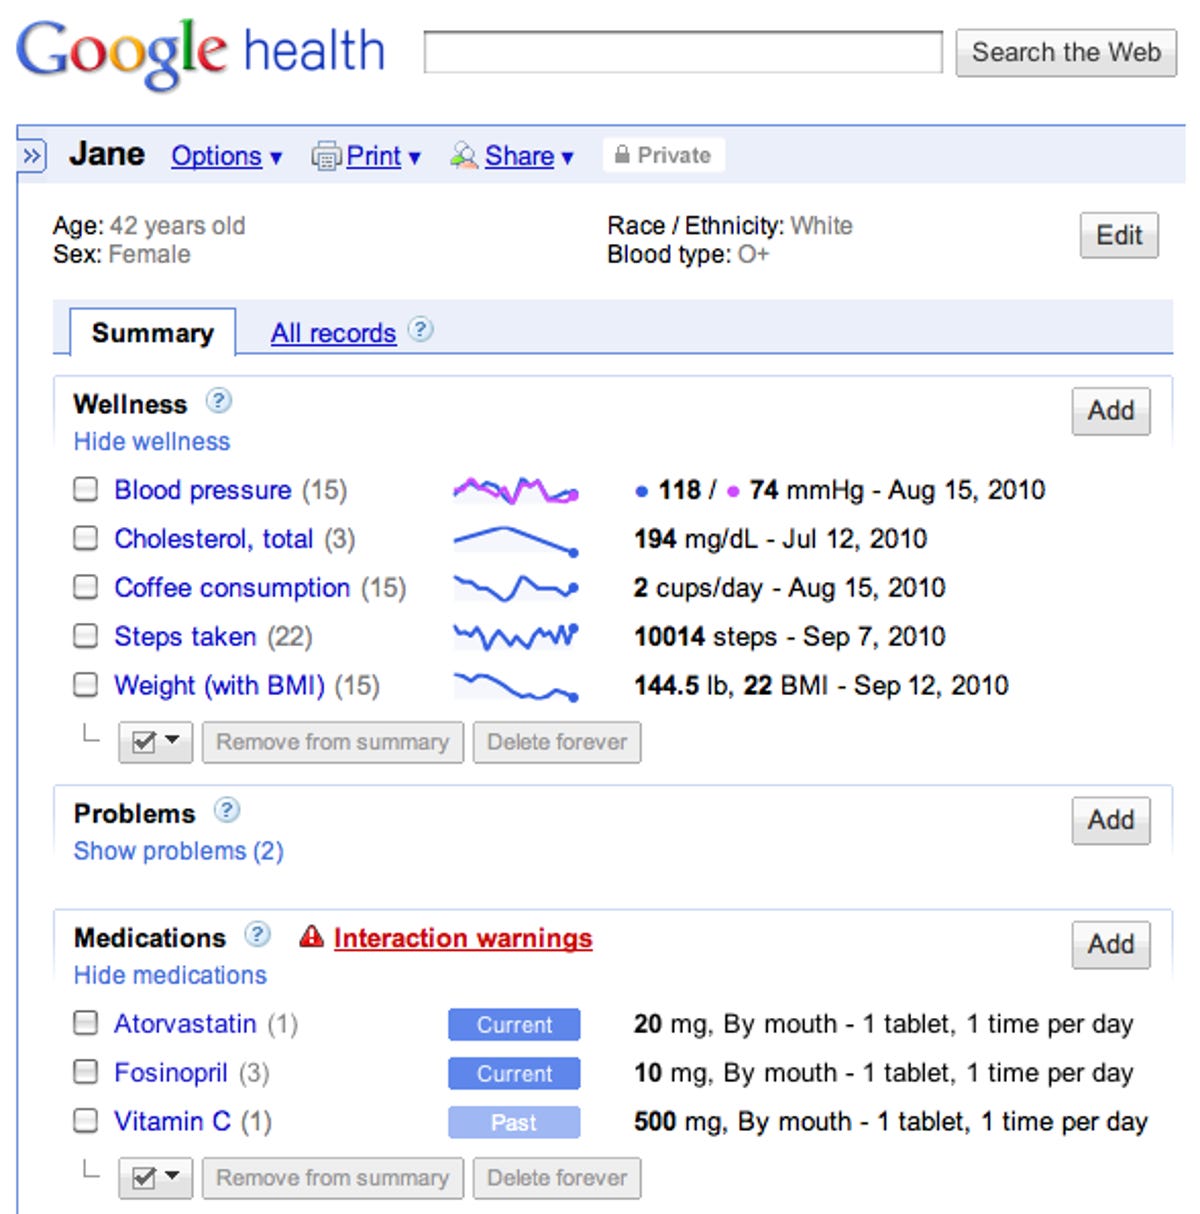 Google Health's new dashboard allows people to add personal health goals and track their medications.